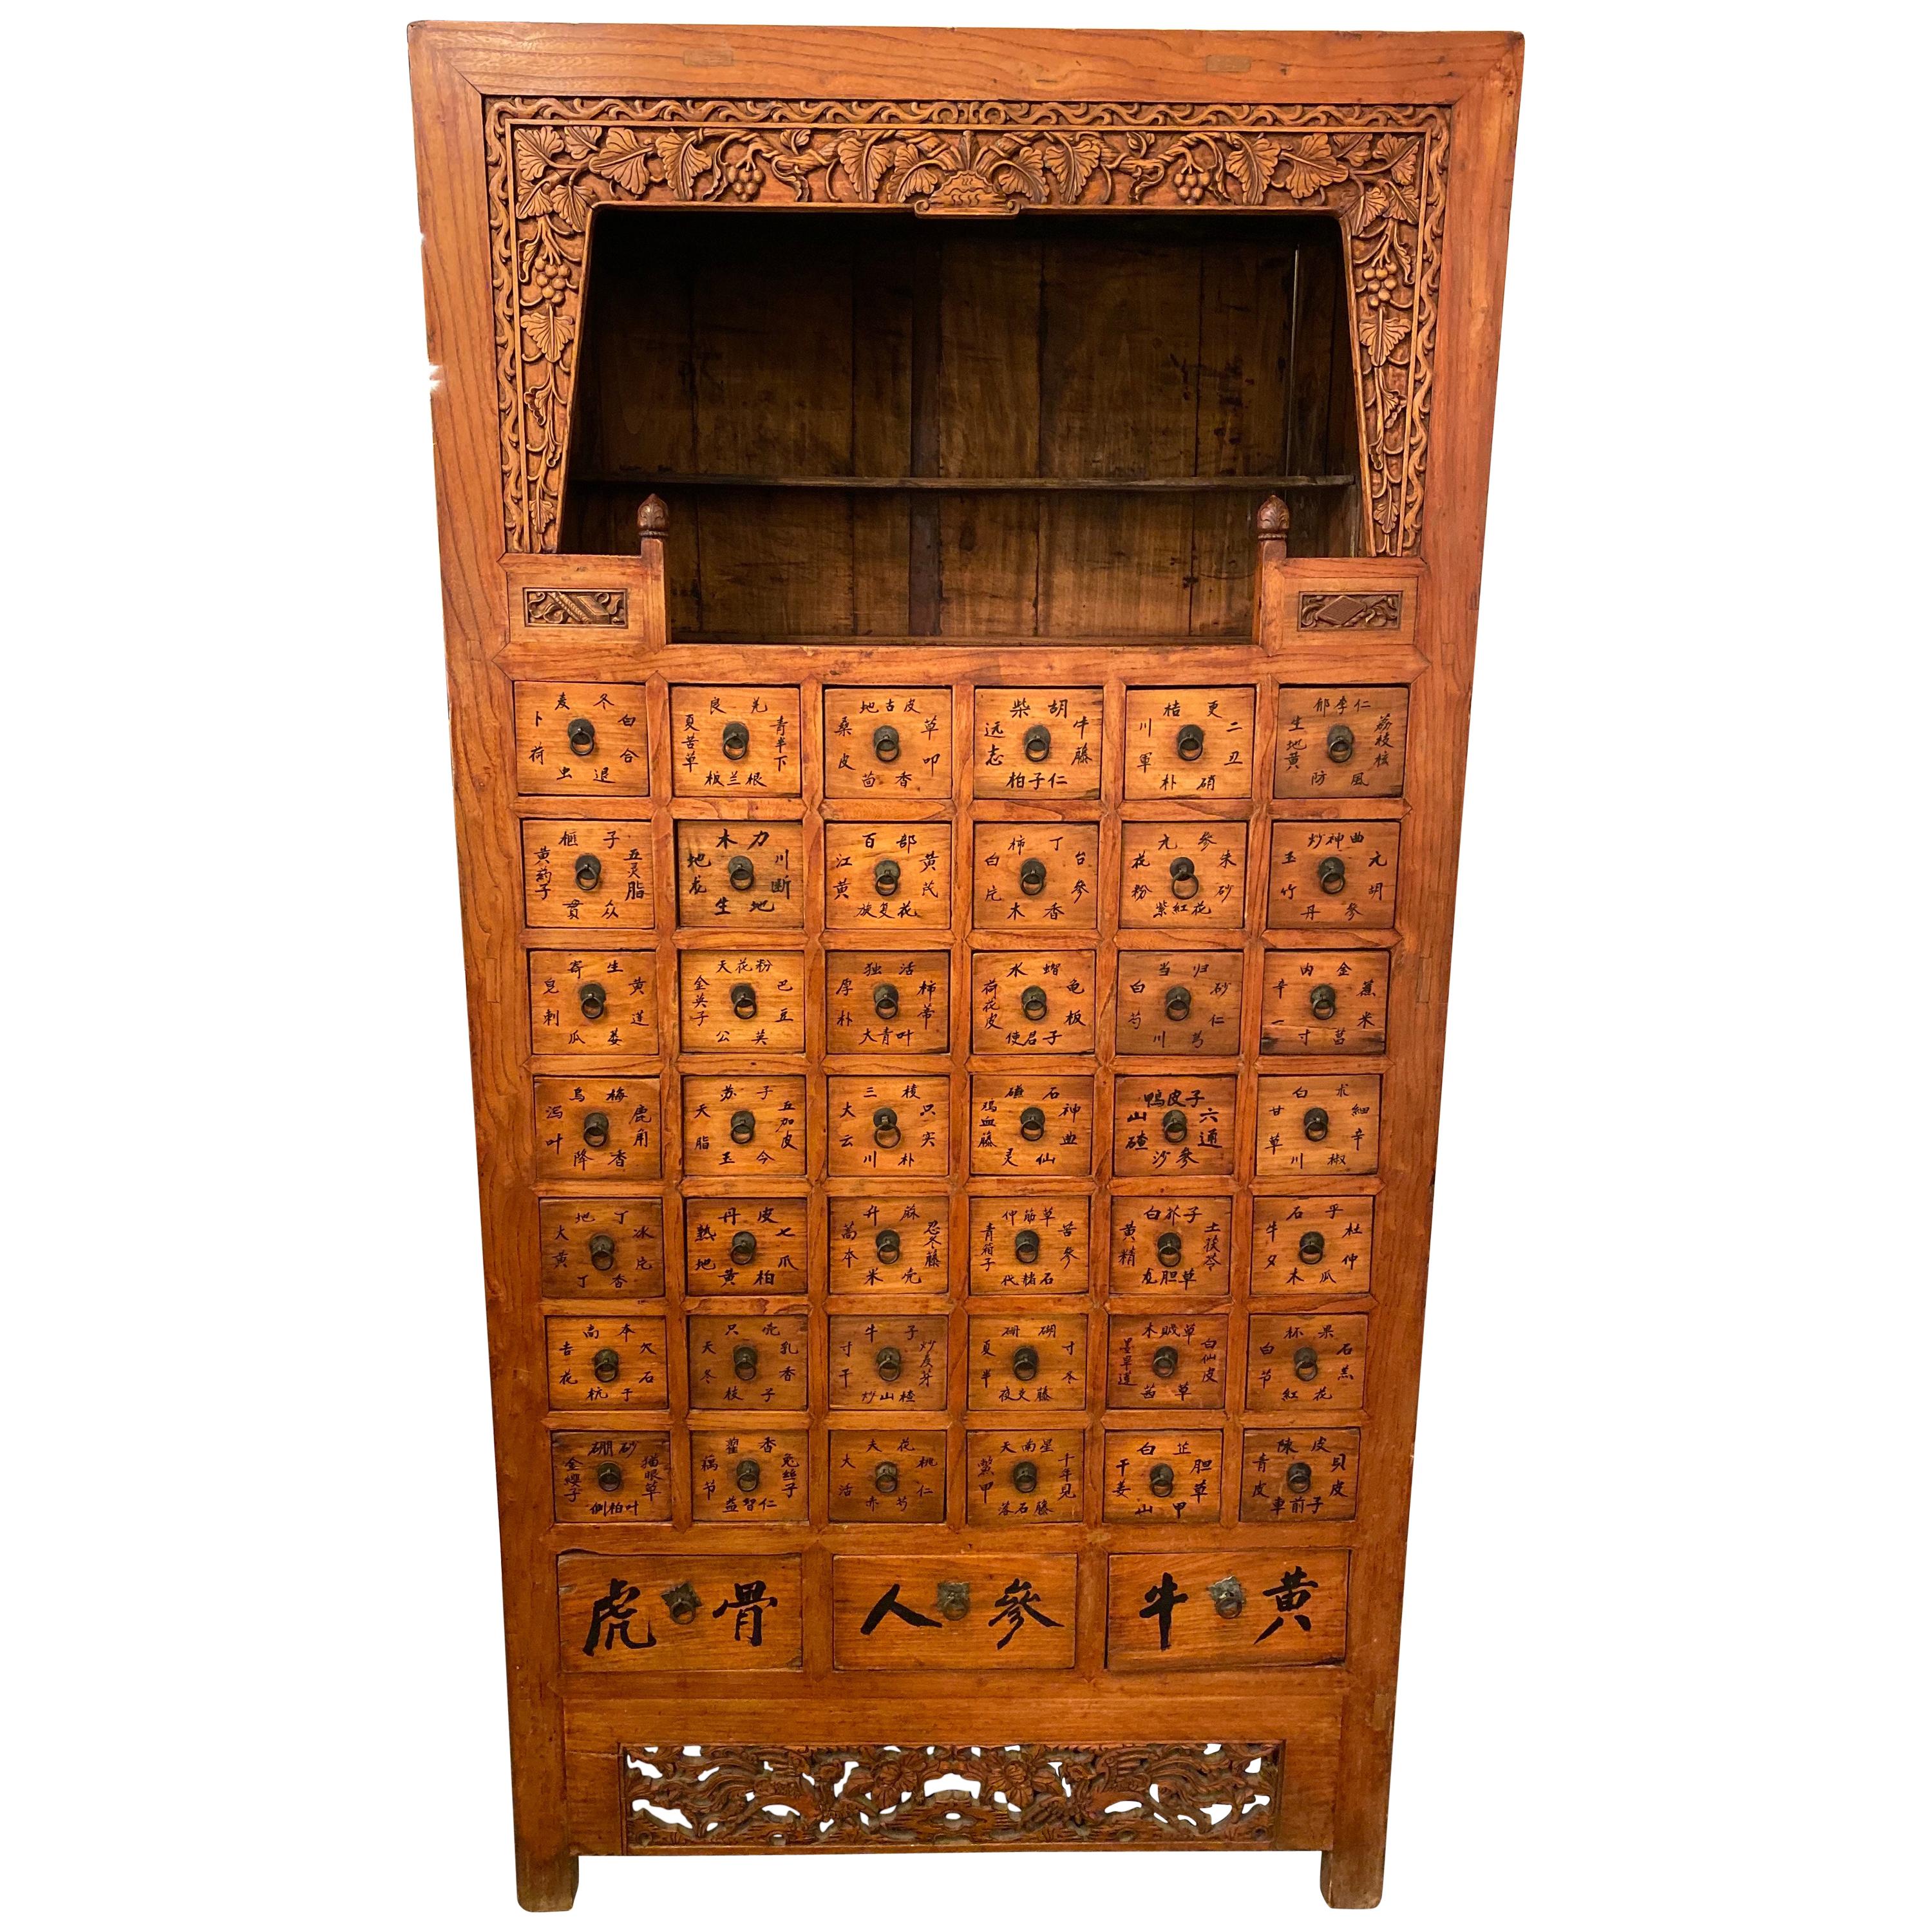 19th Century Apothecary Cabinet Having 45 Drawers, Large and Impressive